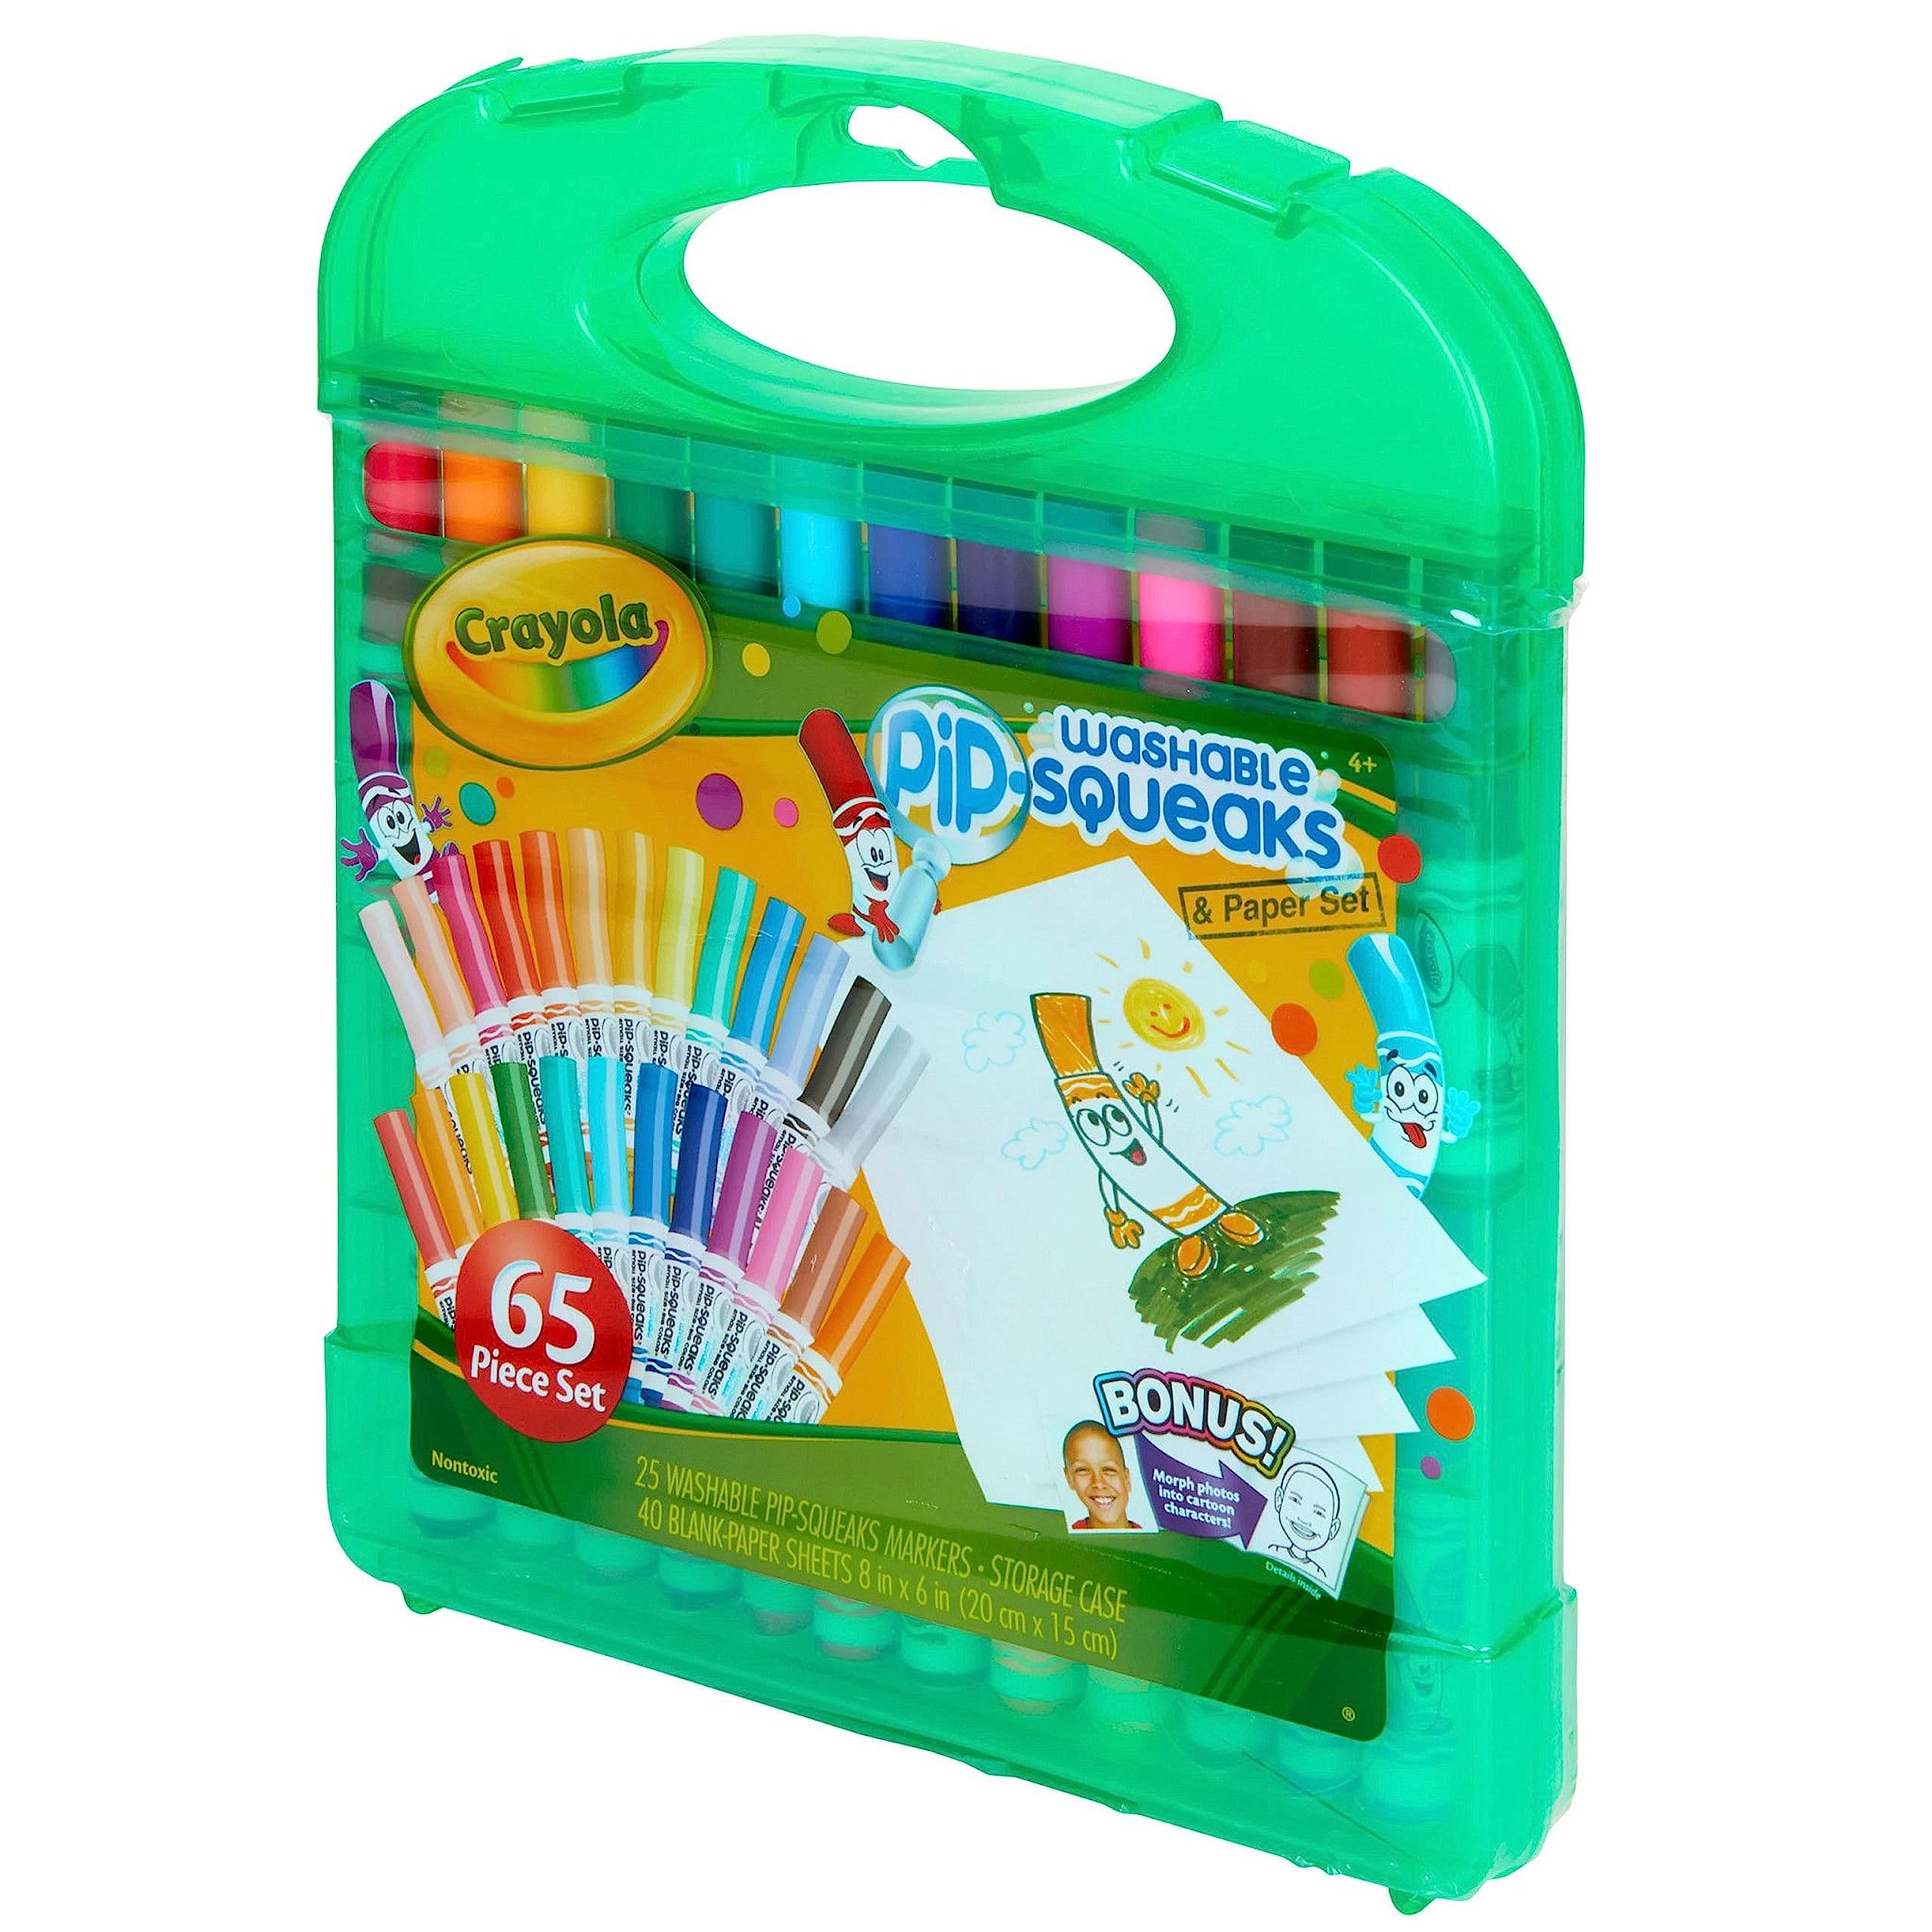 Crayola Pip Squeaks Marker Set (65ct), Washable Markers for Kids, Kids Art Supplies for Classrooms, Mini Markers for School, Ages 4+